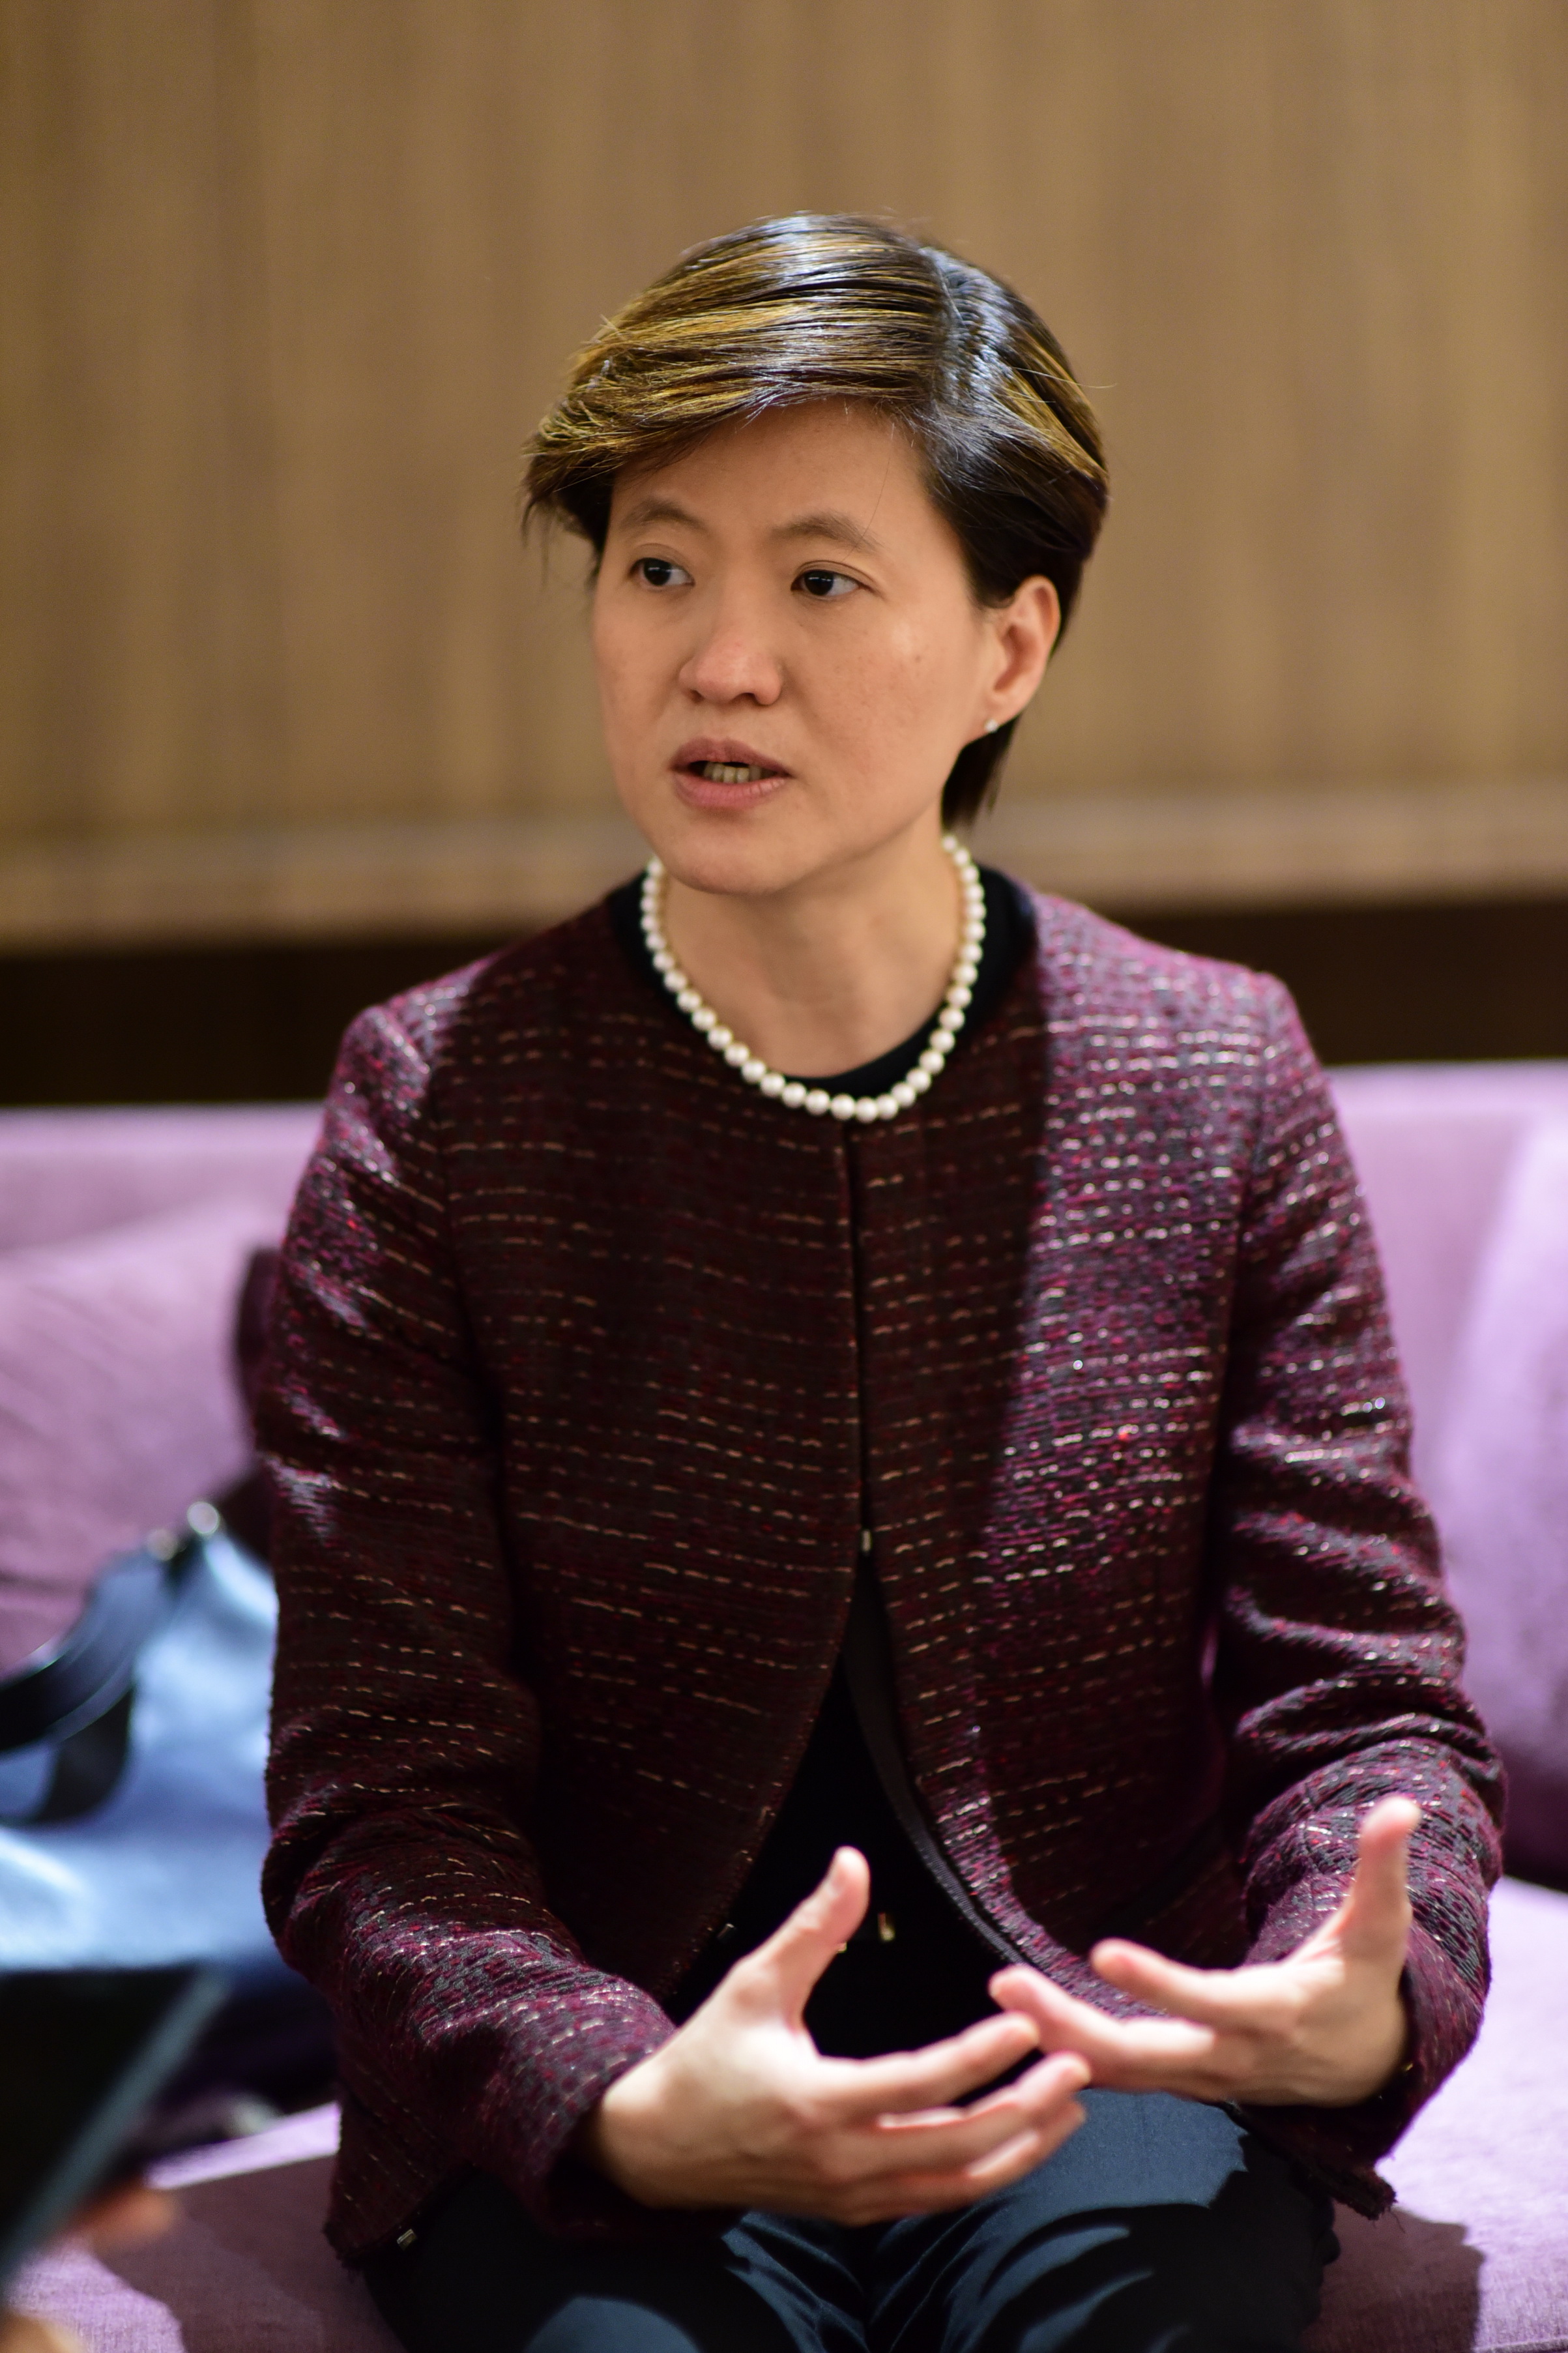 Singapore’s Ambassador to Vietnam Catherine Wong is seen during the talk with Tuoi Tre in Ho Chi Minh City on May 26, 2018. Photo: Tuoi Tre